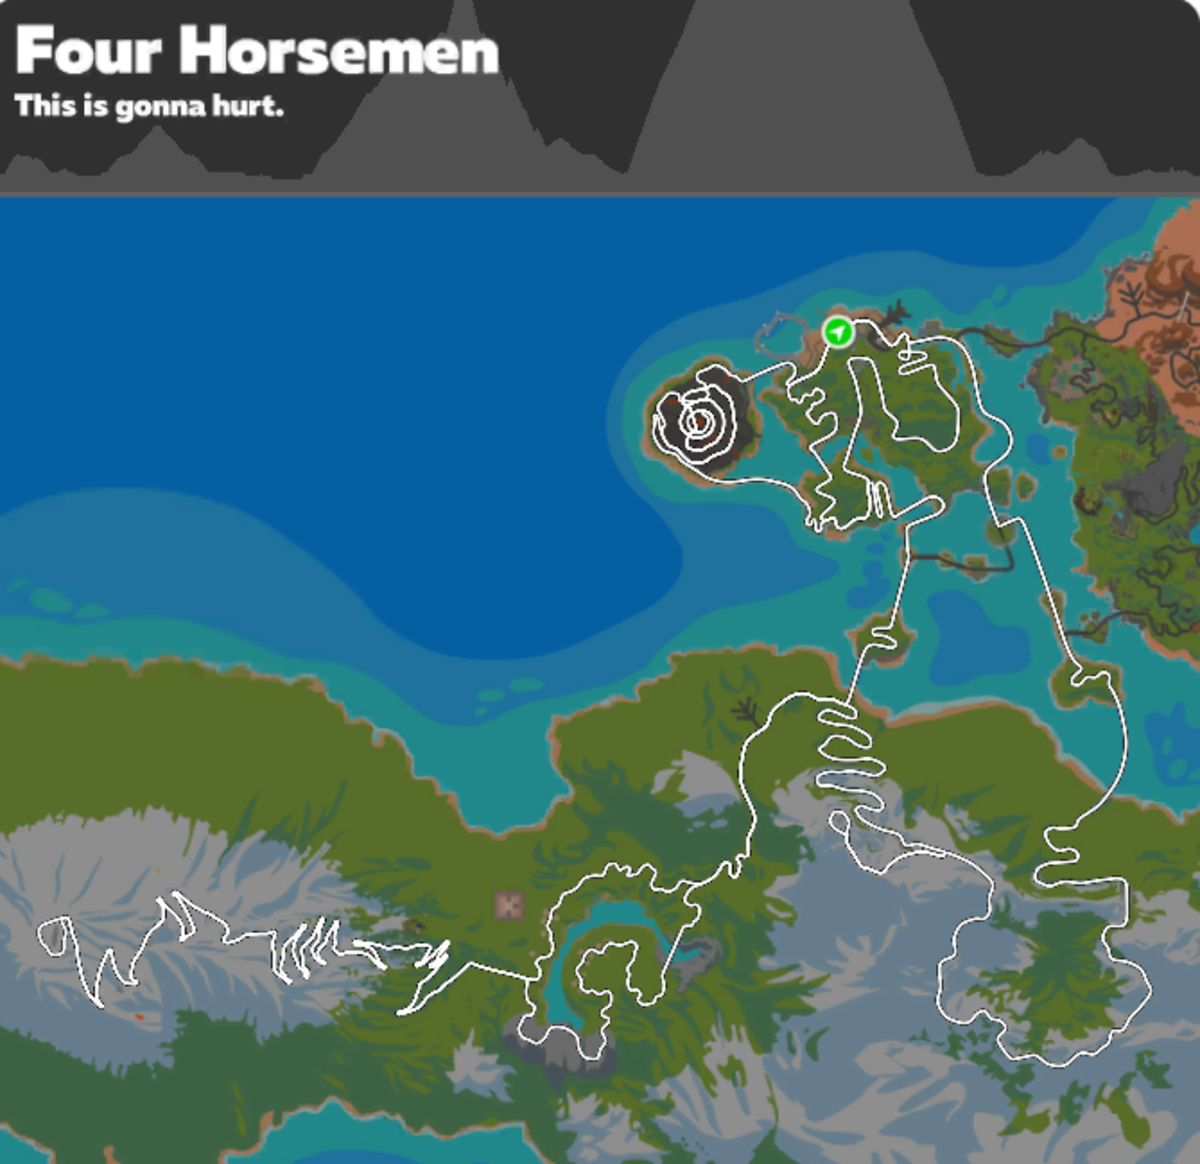 The Four Horsemen takes in the original Watopia Islands and Volcano with extension up the Alpe du Zwift